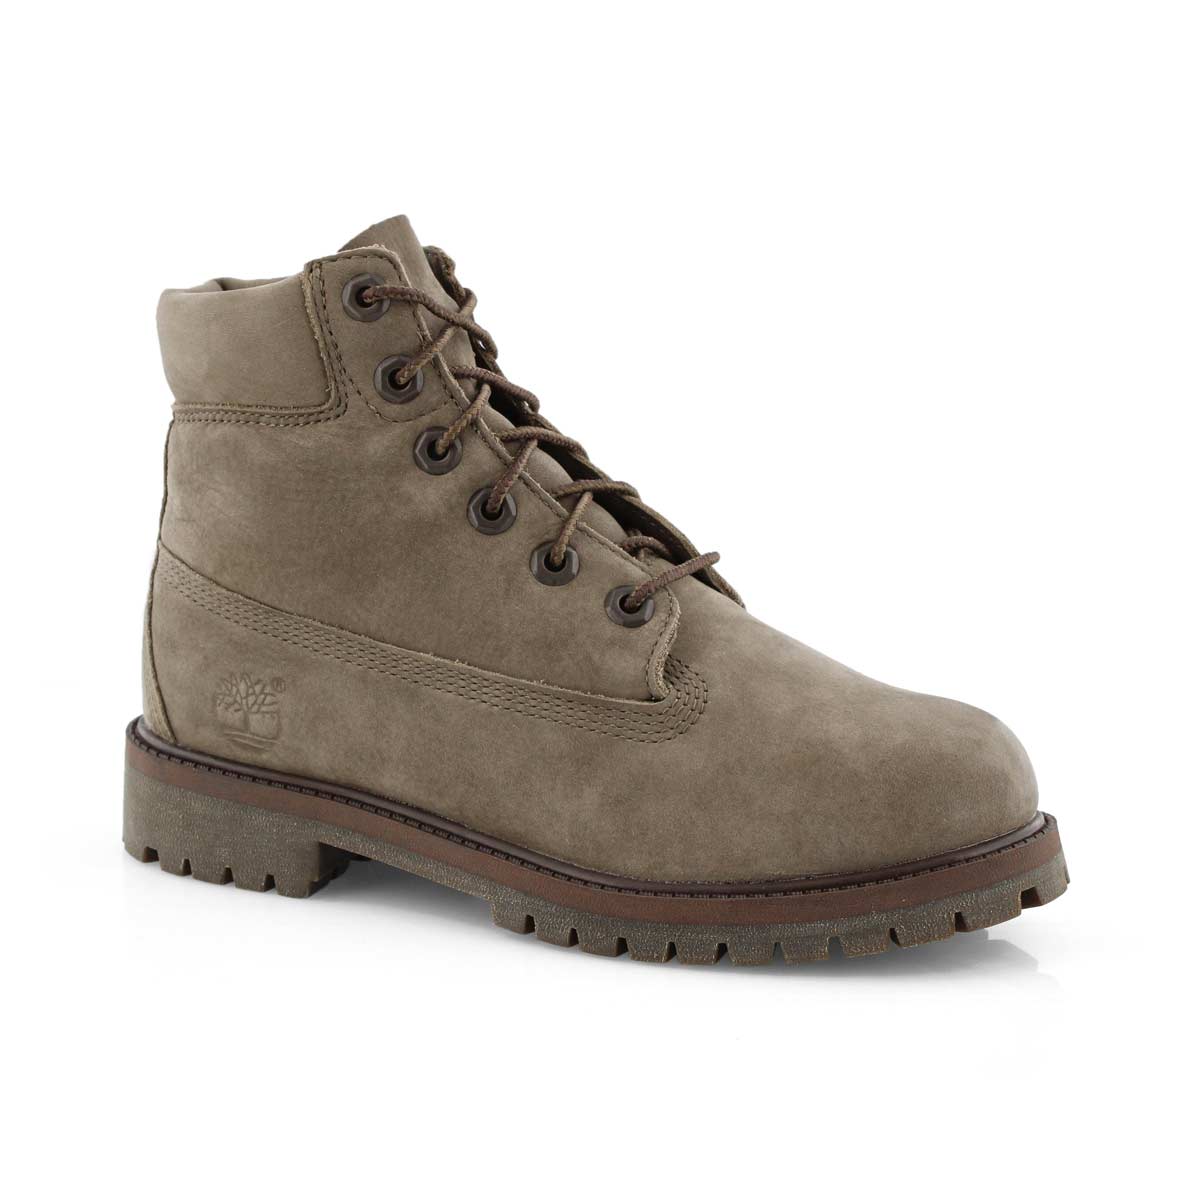 croc timbs Sale,up to 78% Discounts